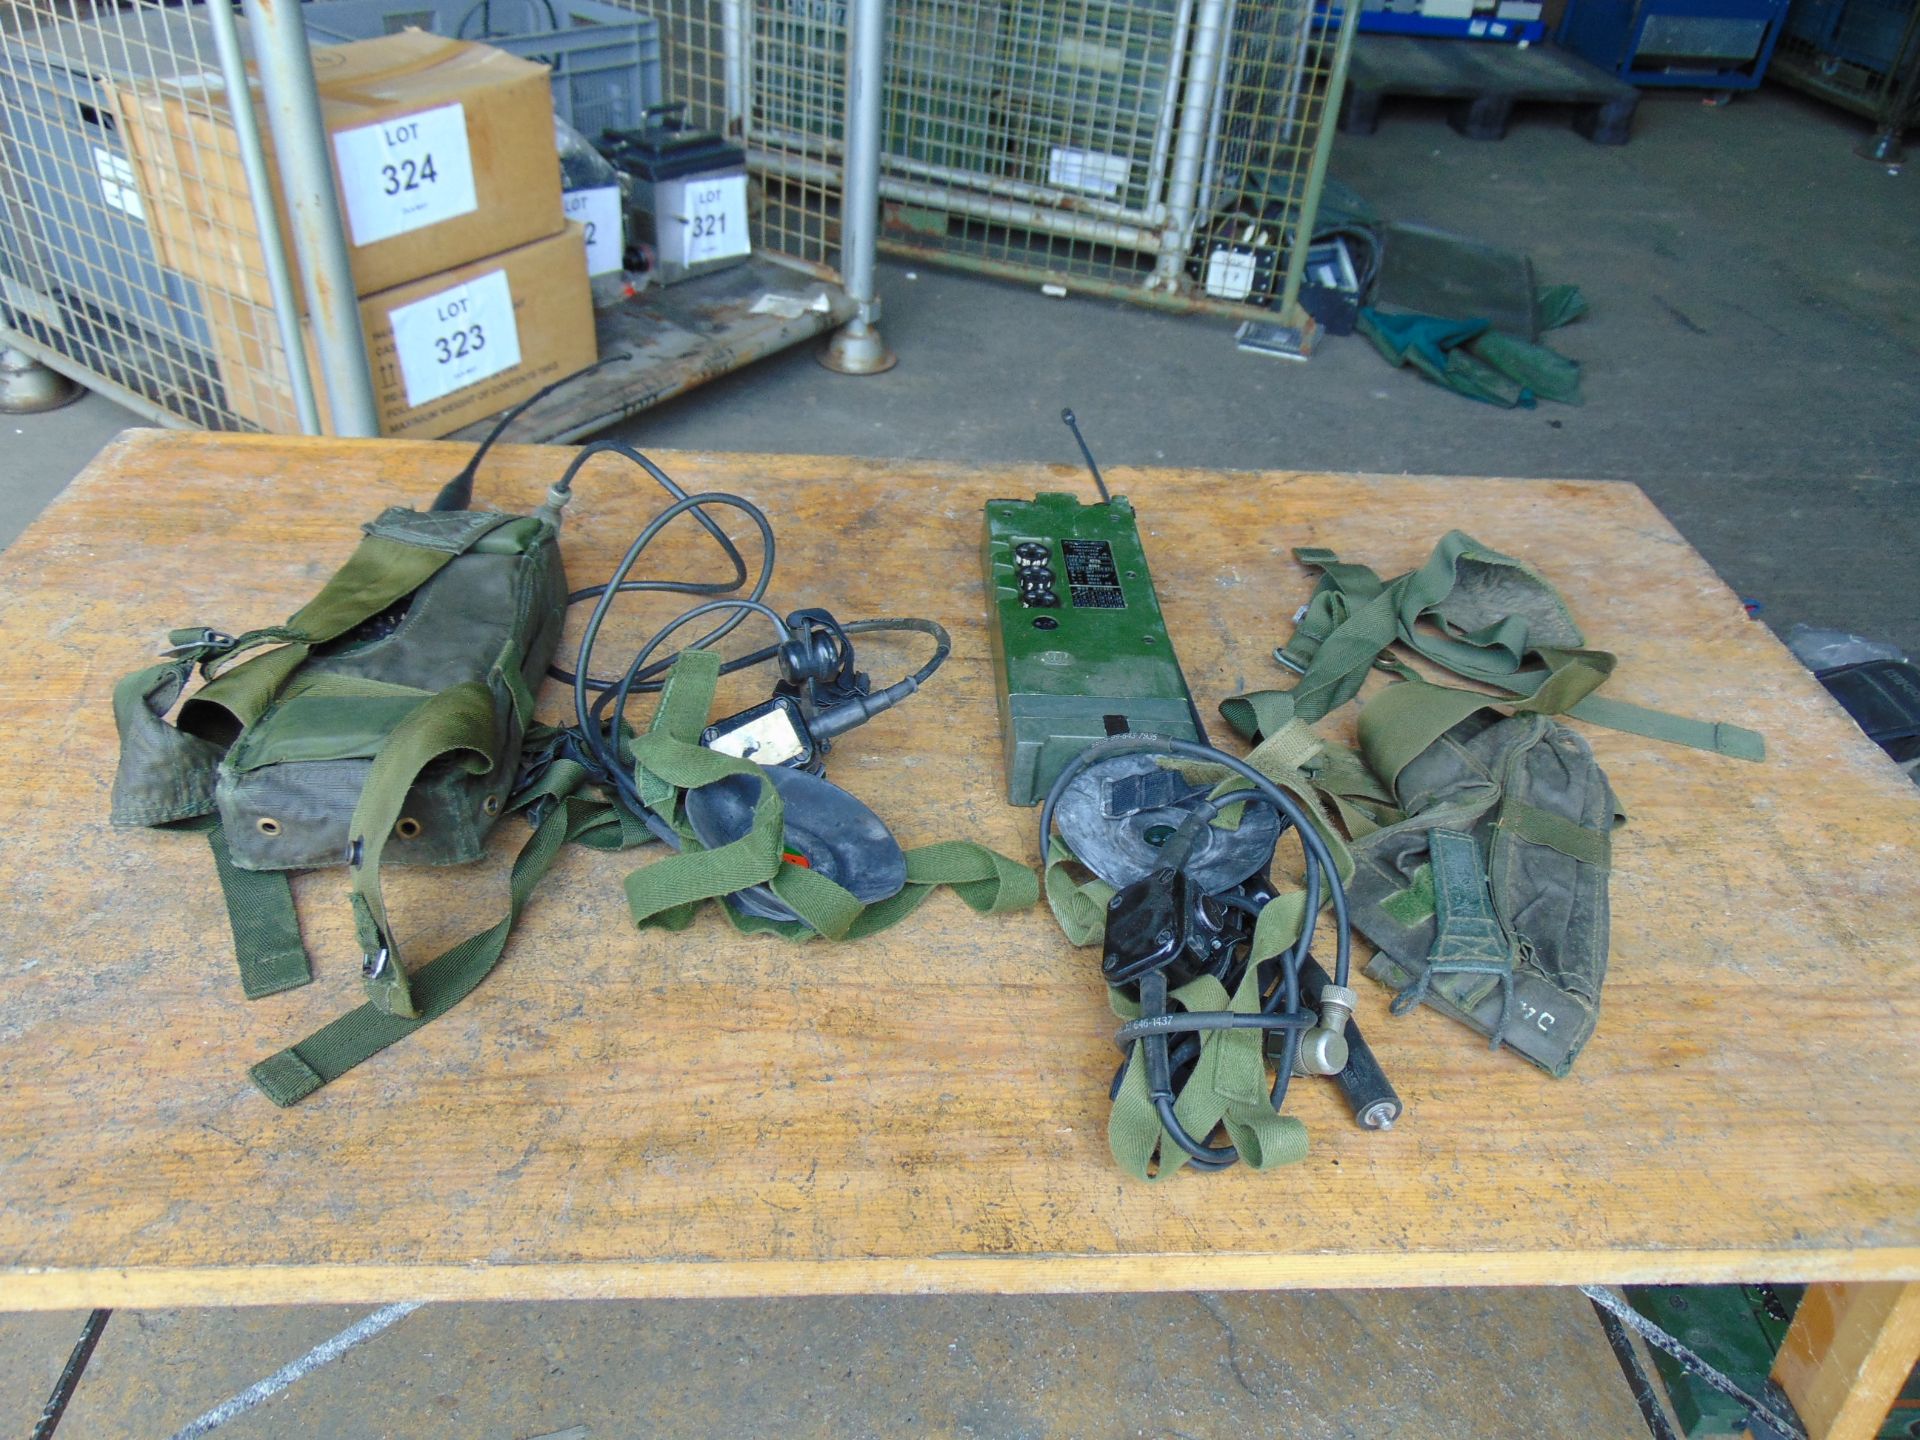 2 x RT 349 British Army Transmitter / Receiver c/w Pouch, Headset, Antenna and Battery Cassette - Image 2 of 4